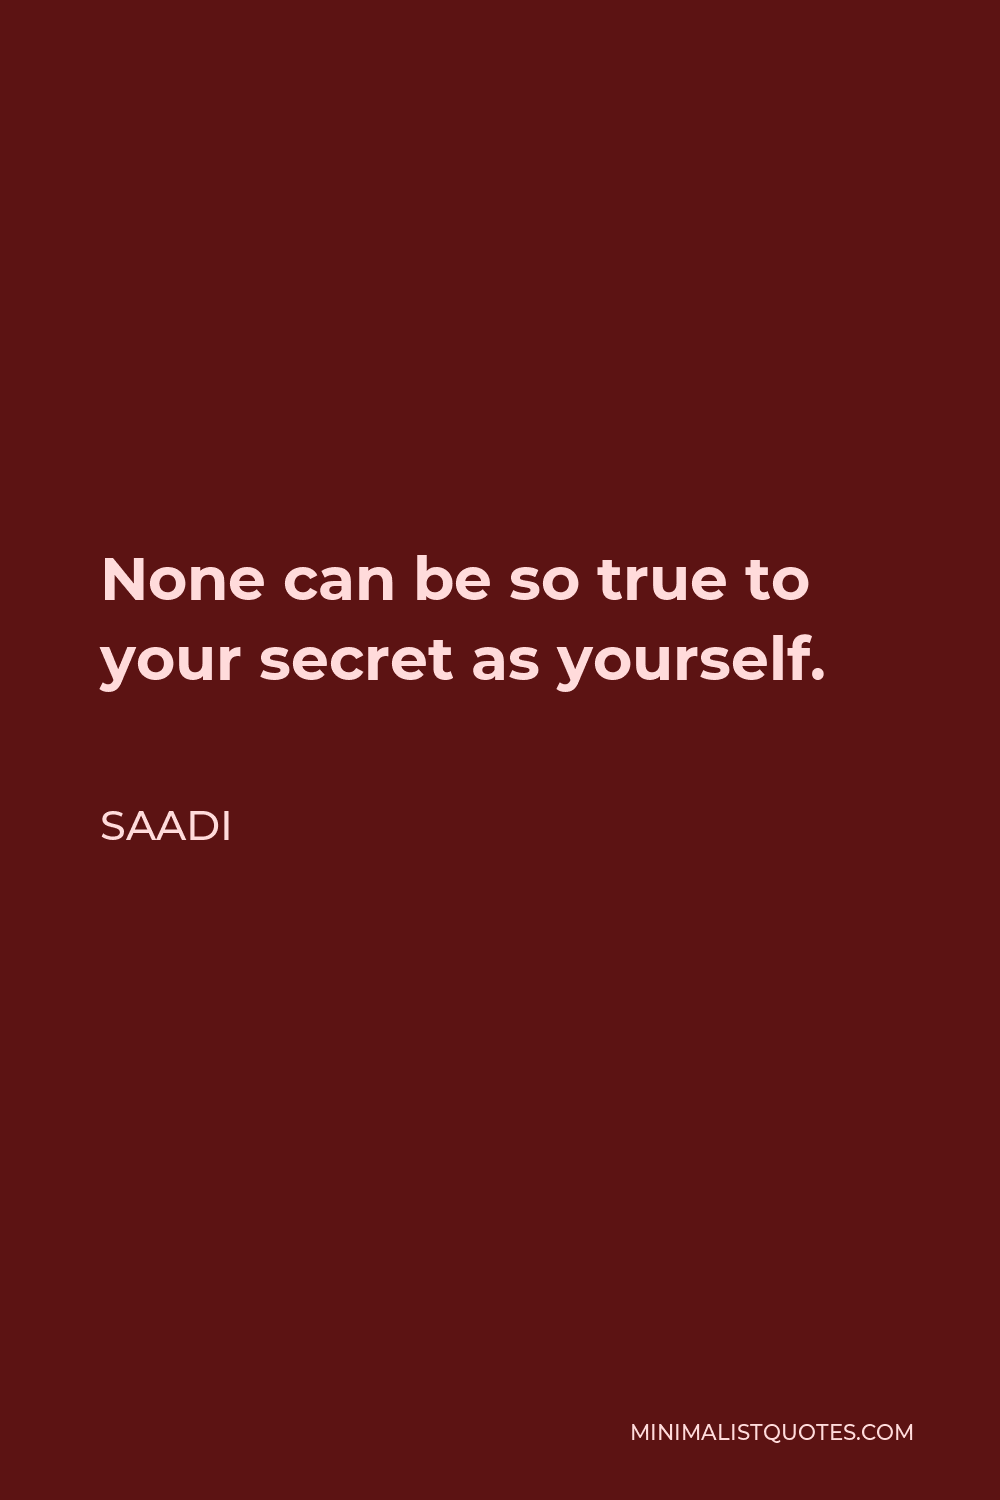 Saadi Quote - None can be so true to your secret as yourself.